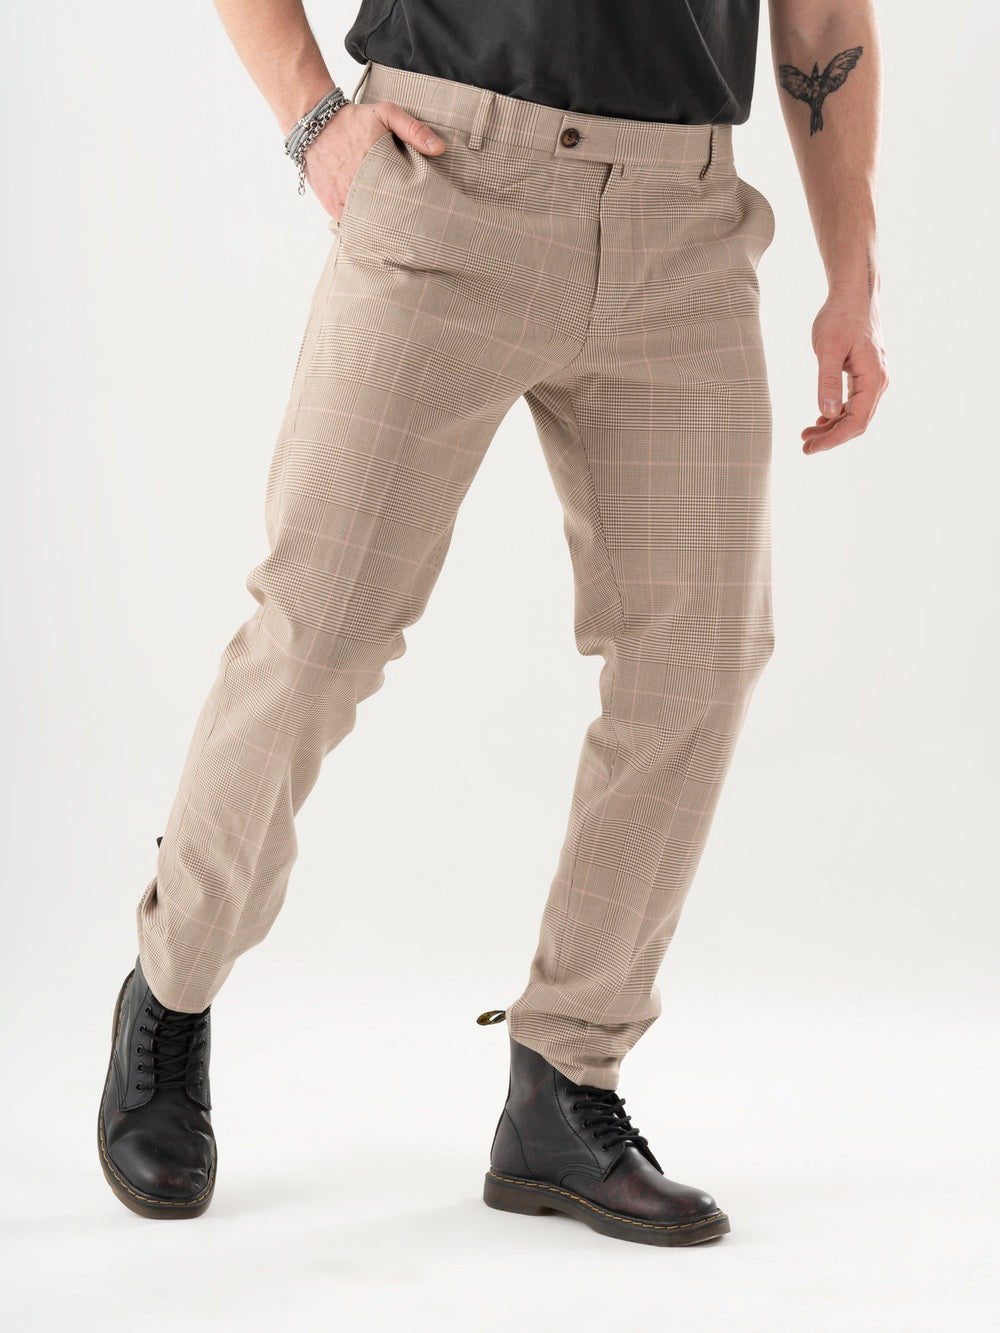 A man wearing MOONSHOT PANTS in a skinny fit.